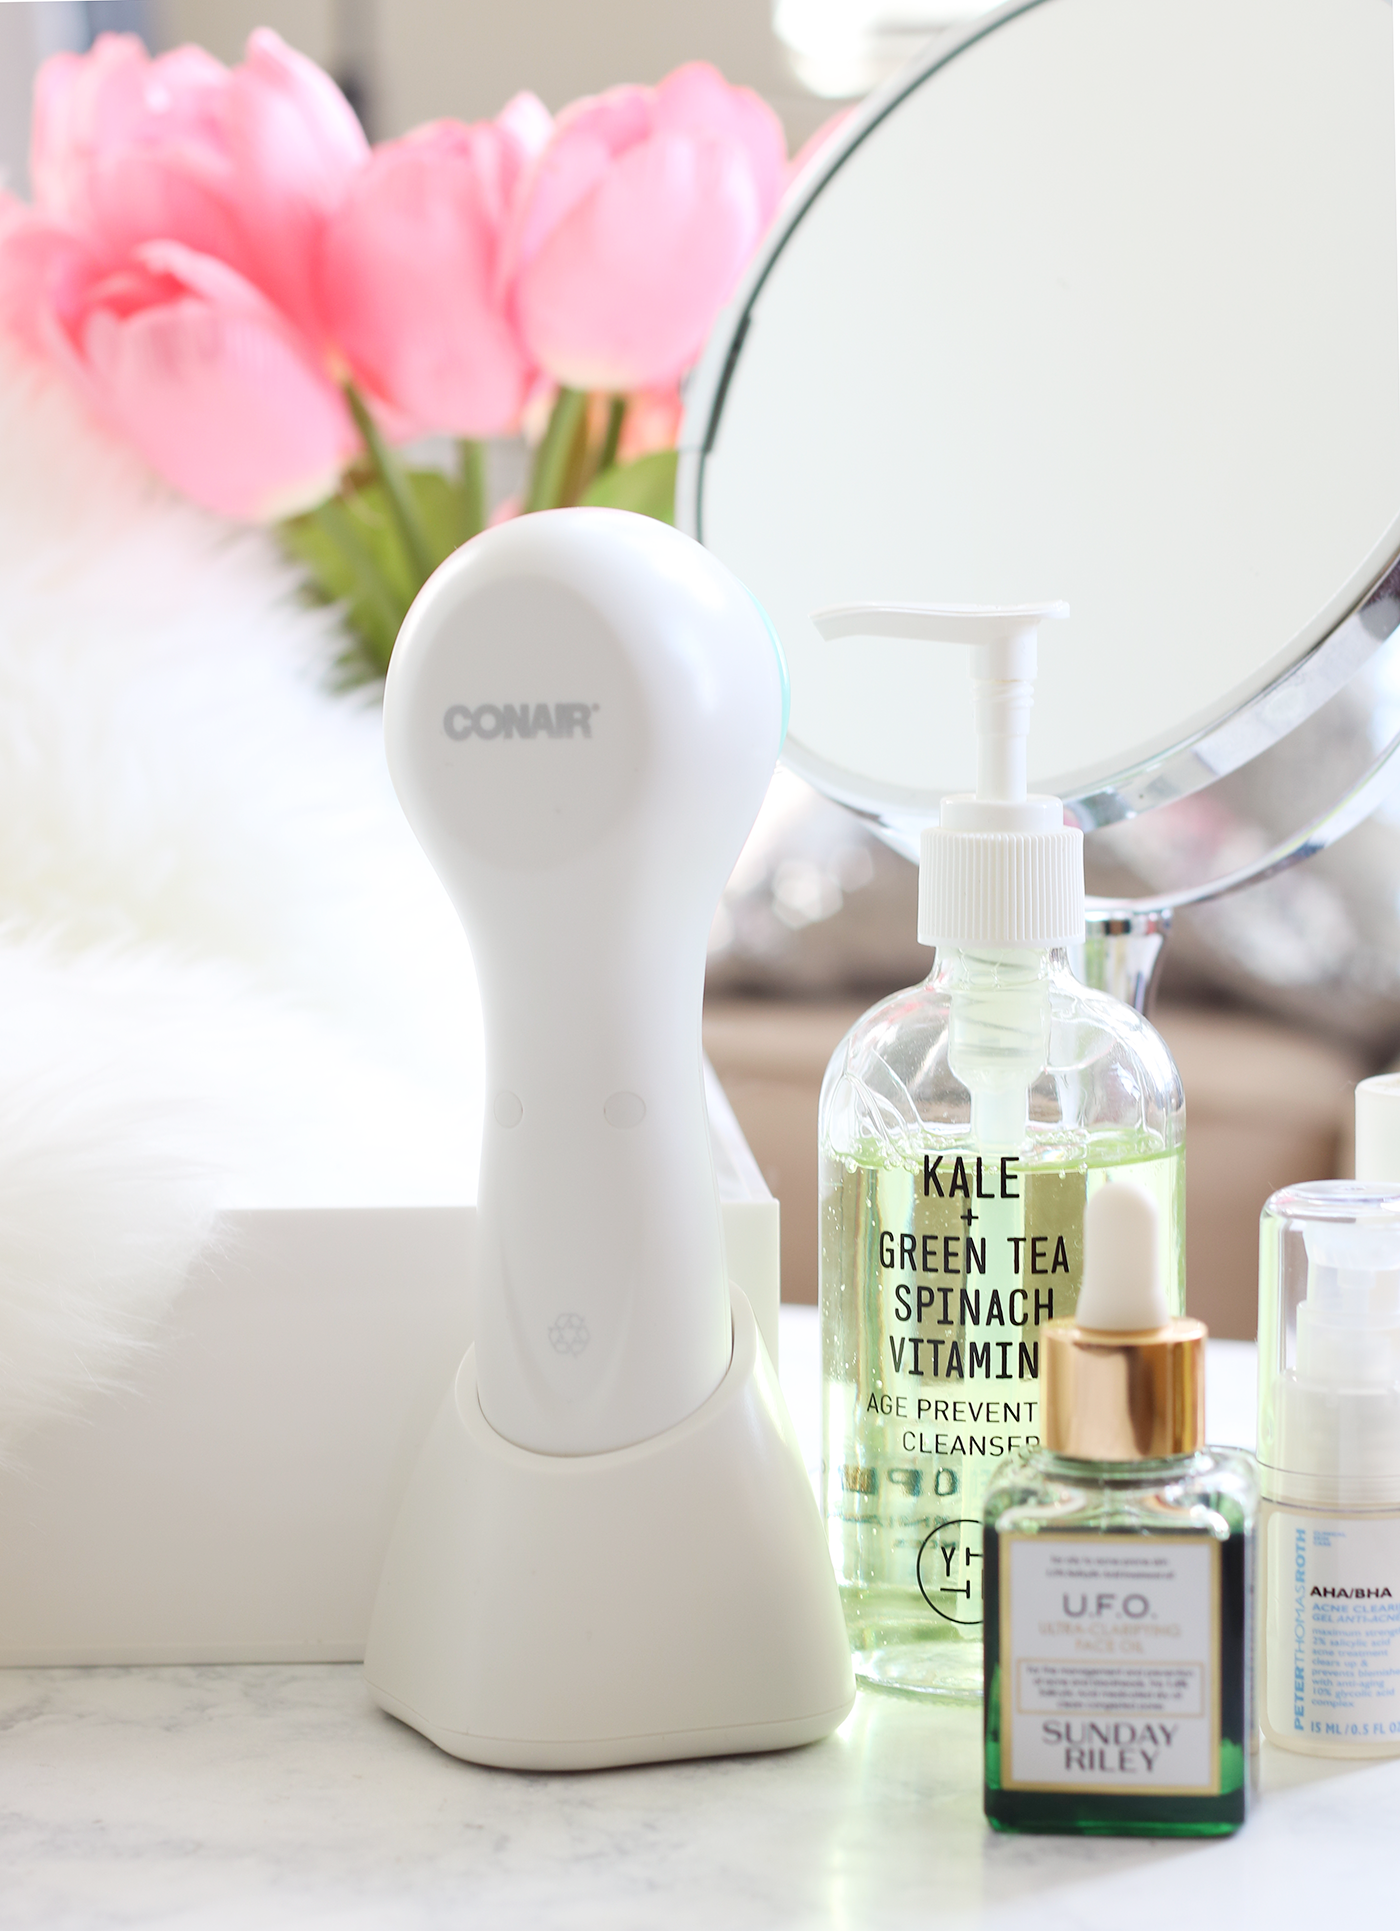 Need a reason to try a cleansing brush? Keep reading and see why this cleansing brush is the BEST one with the perfect price point as well.